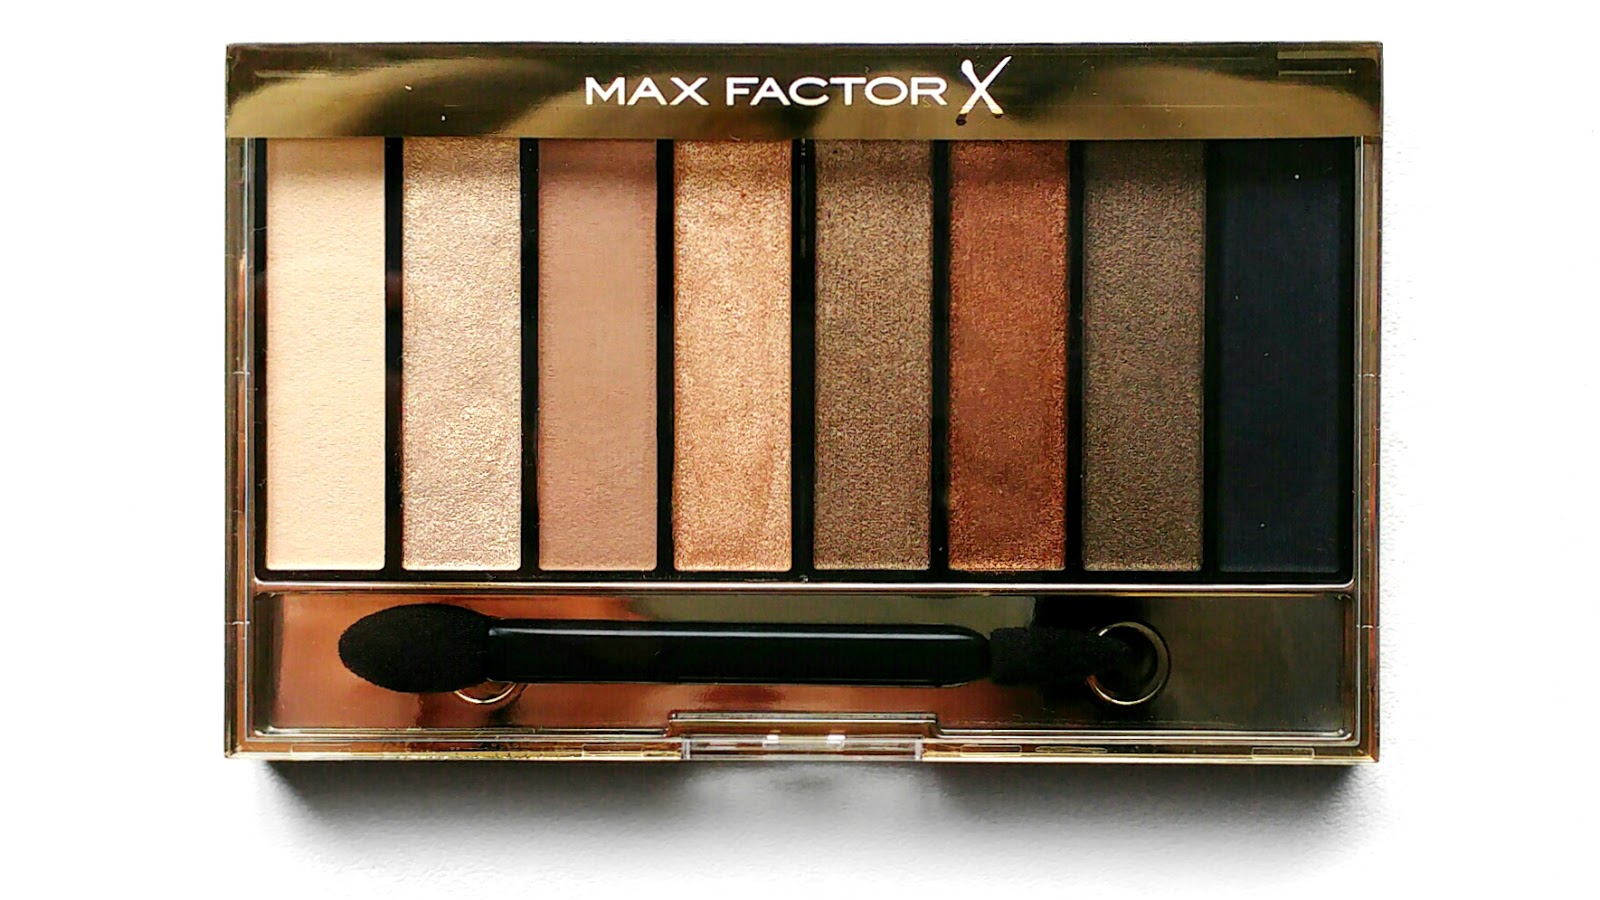 Max Factor Cappuccino Nudes eyeshadow palette - Floating 